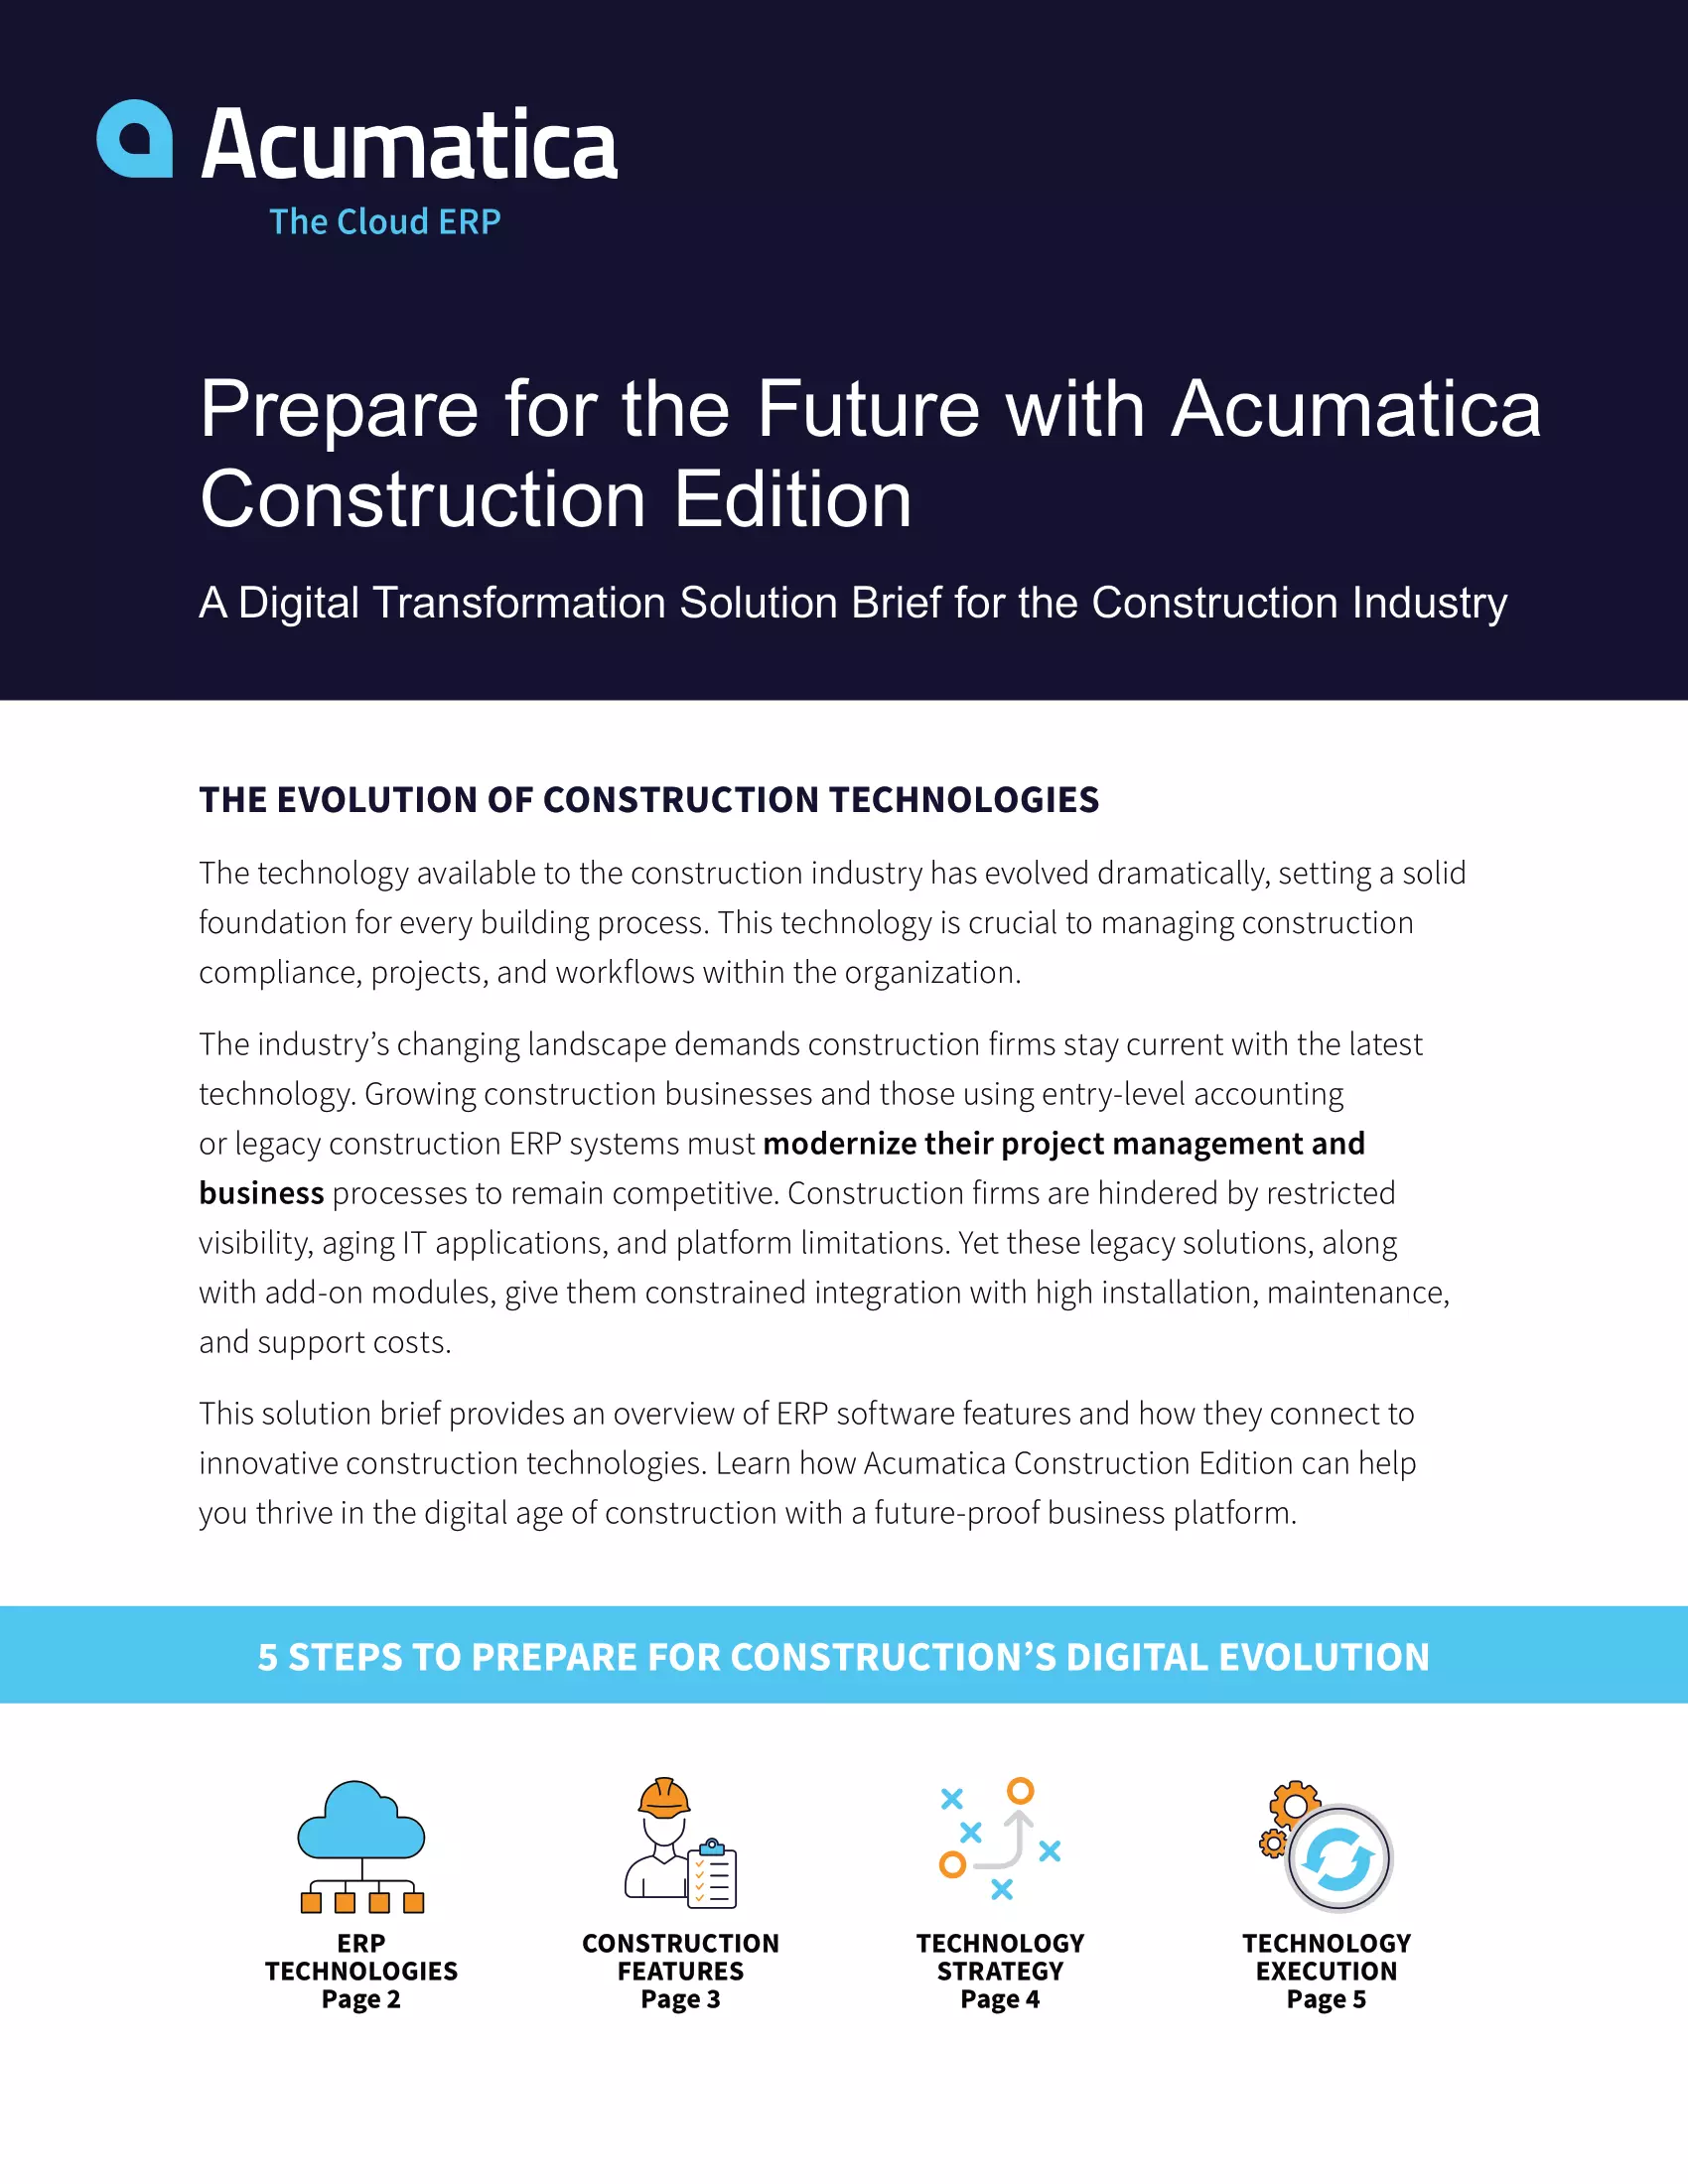 Digital Transformation in Construction: A Must for Growing Construction Businesses